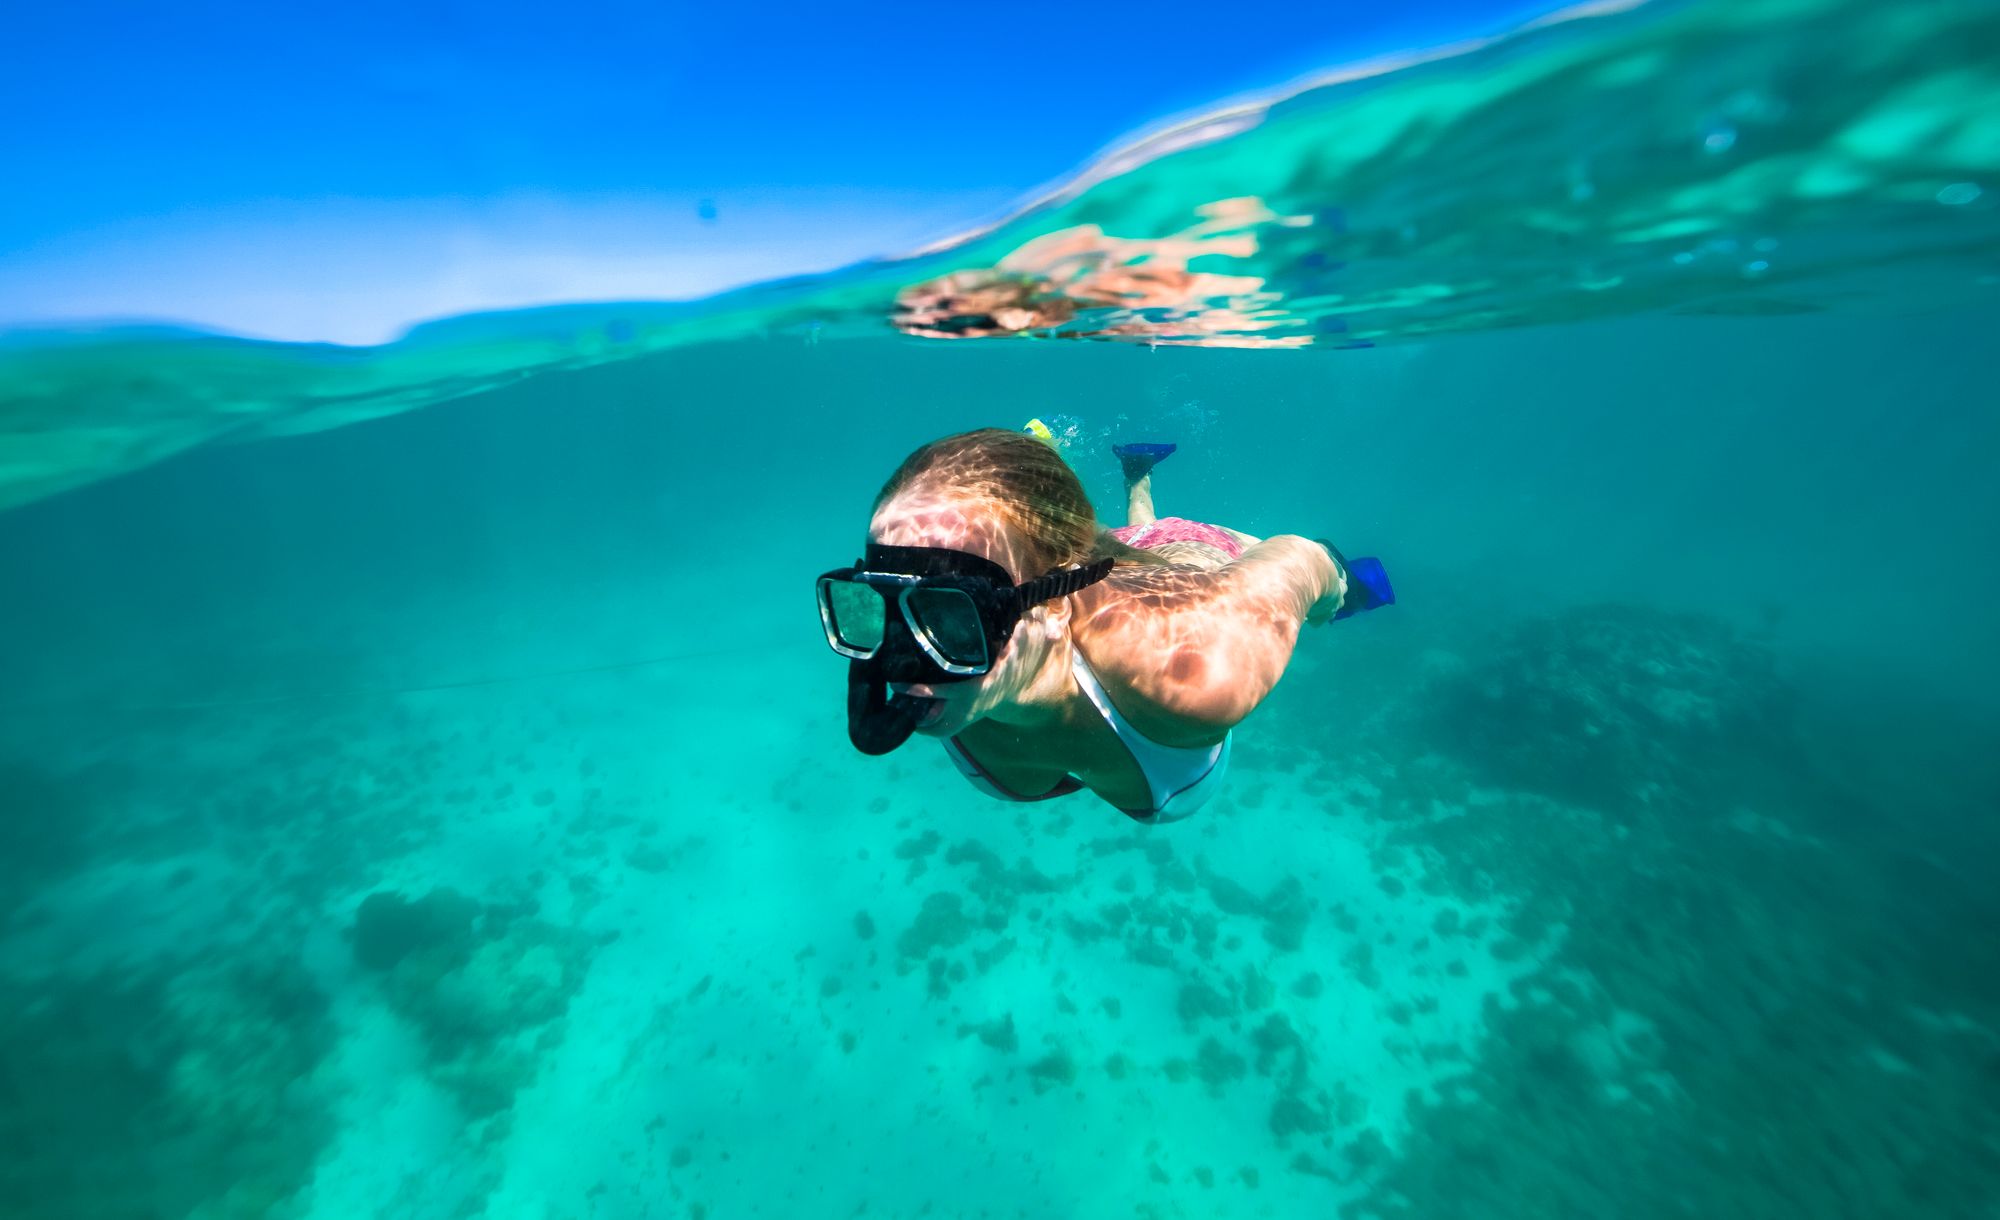 Snorkeling in the Montego Bay: What To Expect